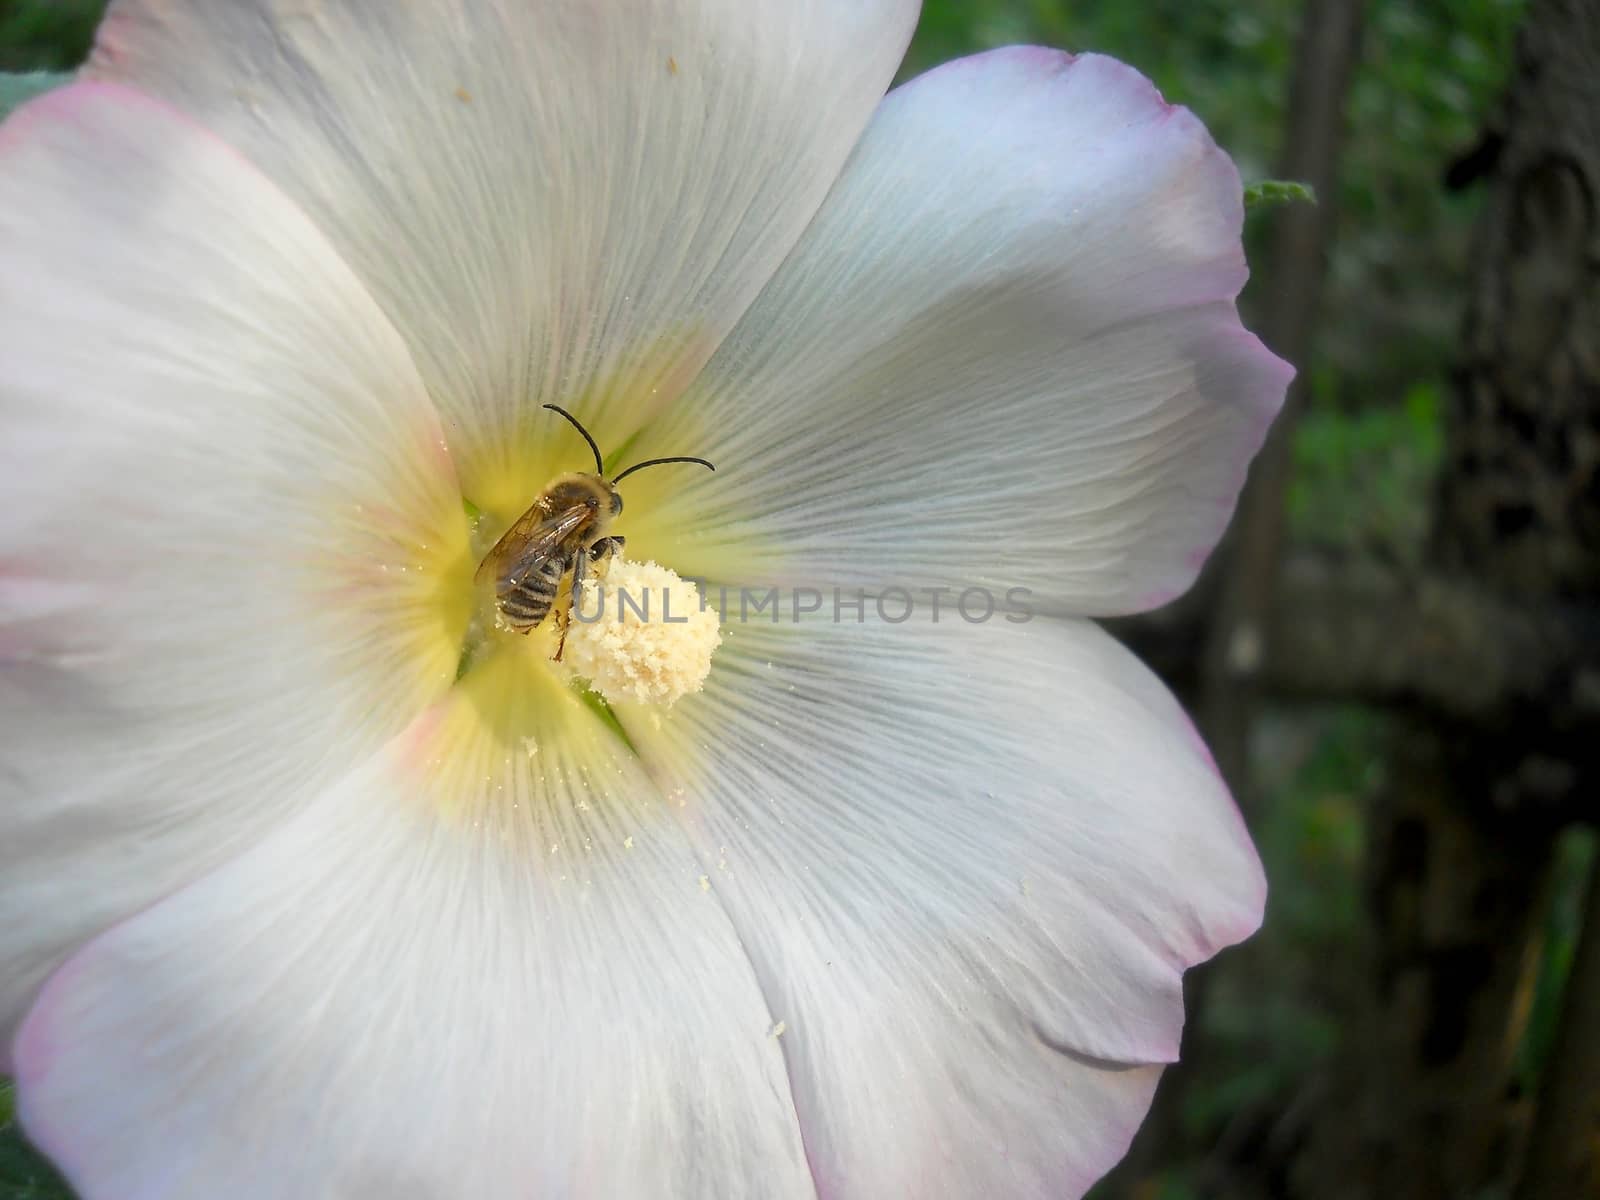 bumblebee in hollyhock flower by fadeinphotography